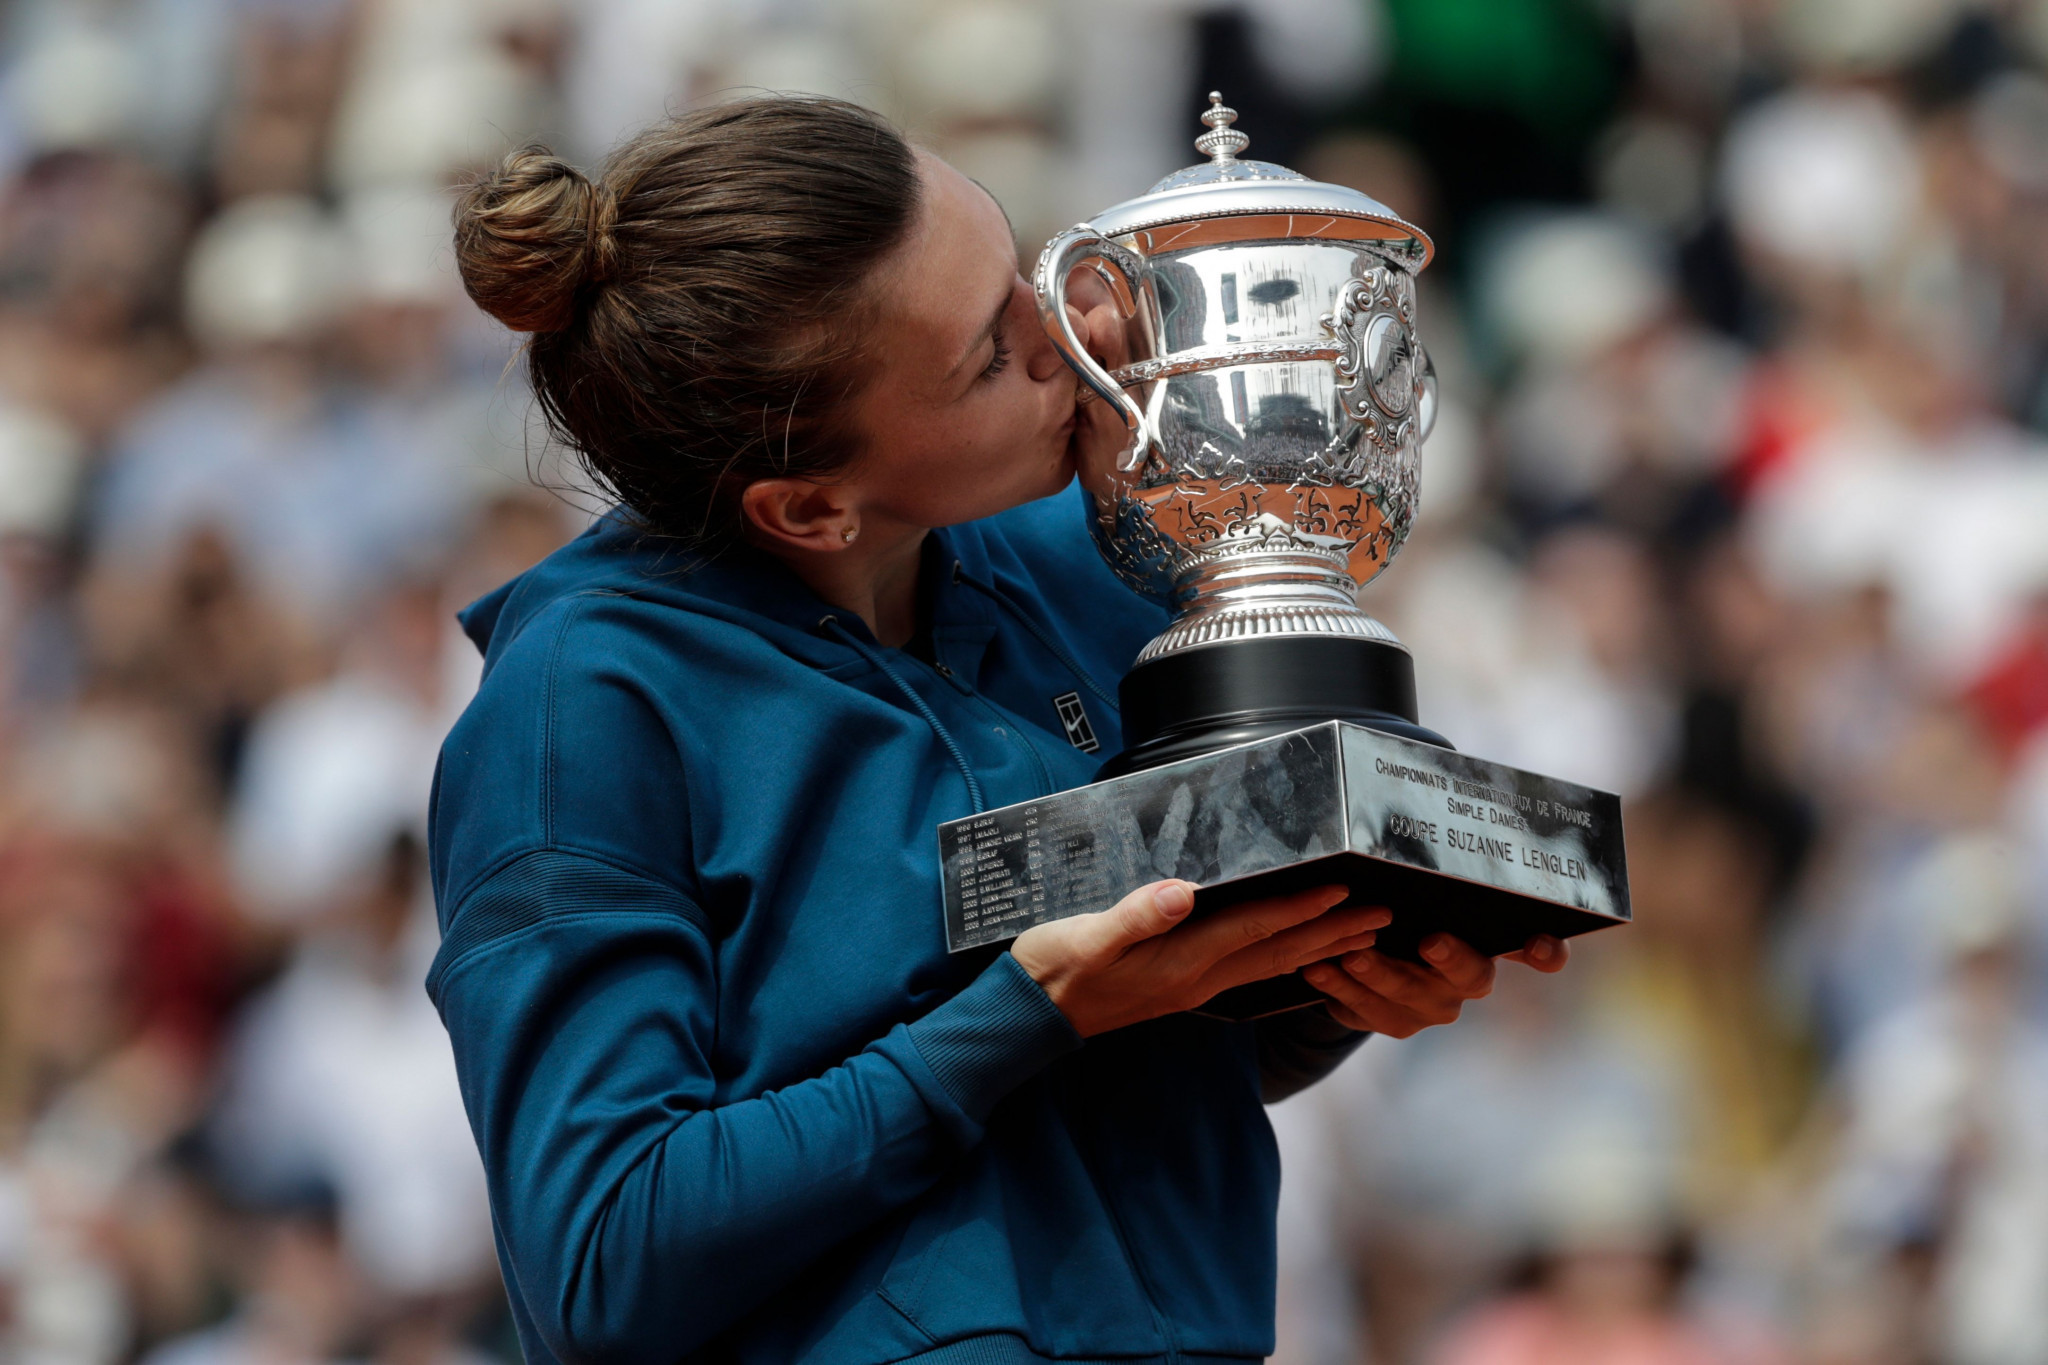 Romania's Simona Halep ended a long wait for a Grand Slam title with victory at the French Open ©Getty Images